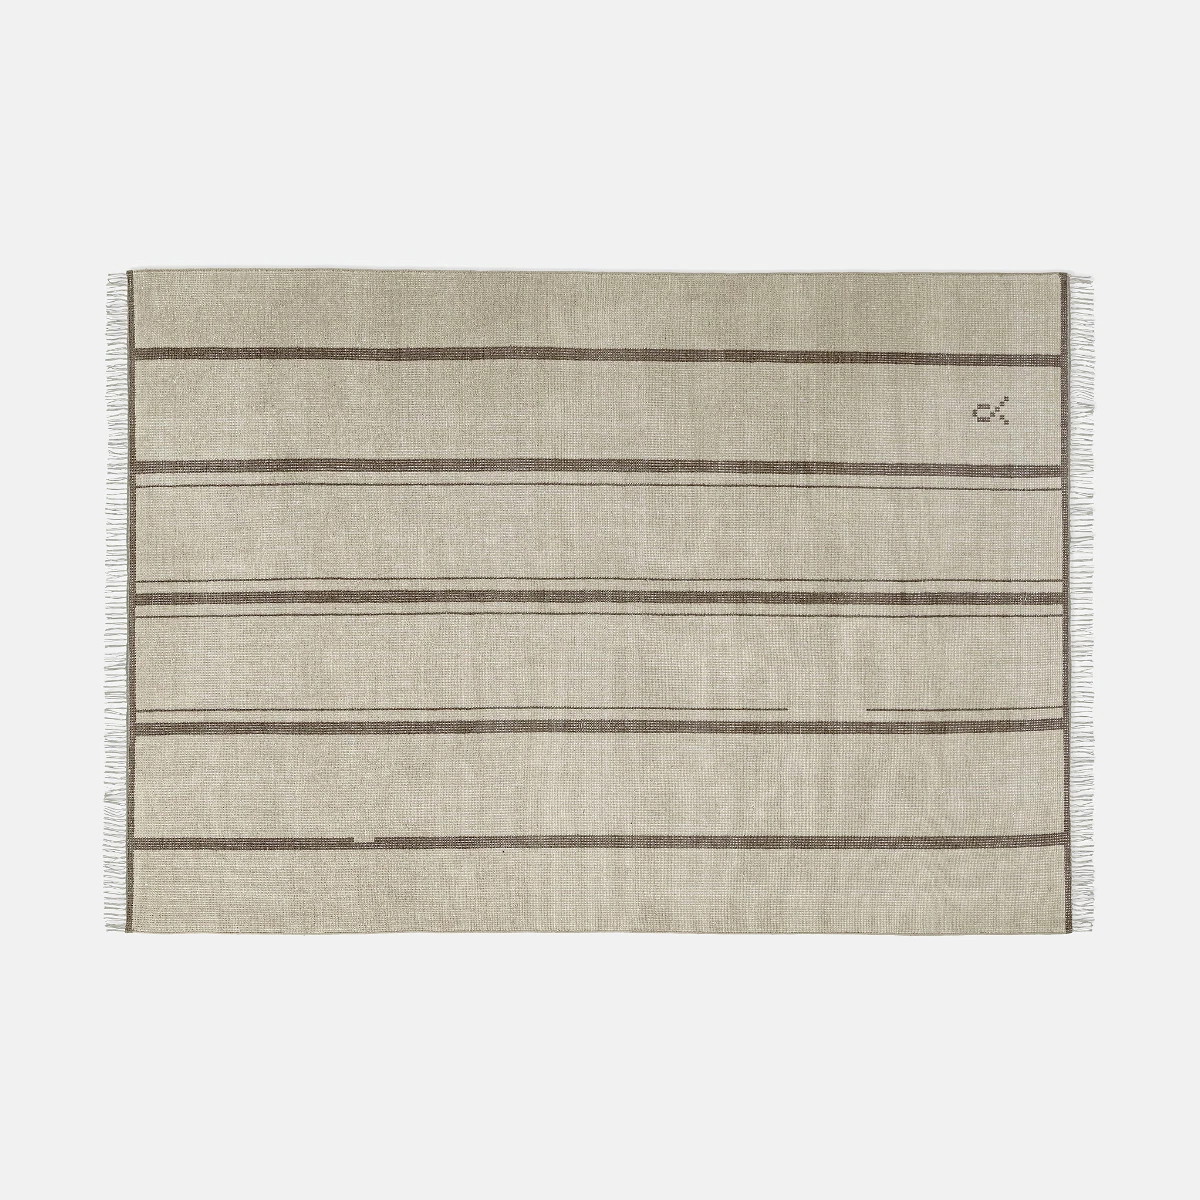 a beige and brown striped rug on a white background